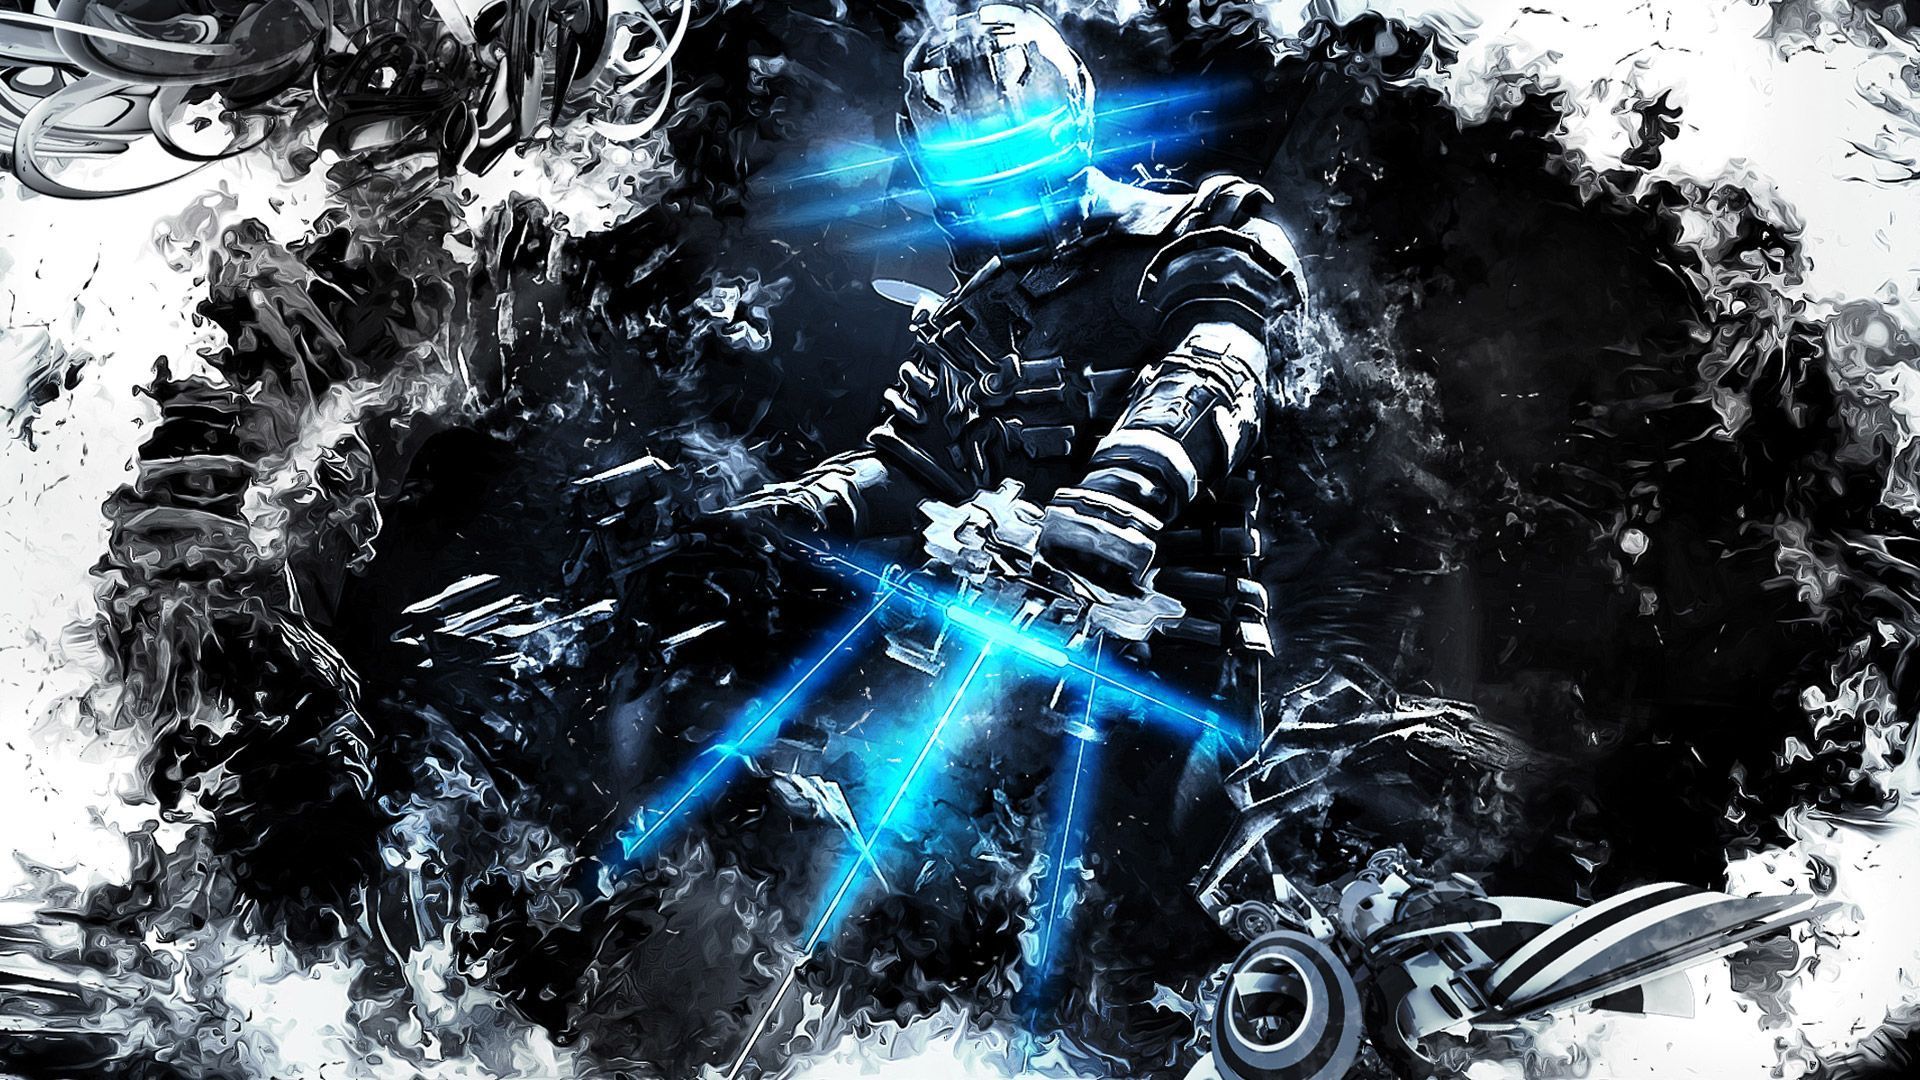 Awesome Dead Space 3 wallpaper 1920x1080